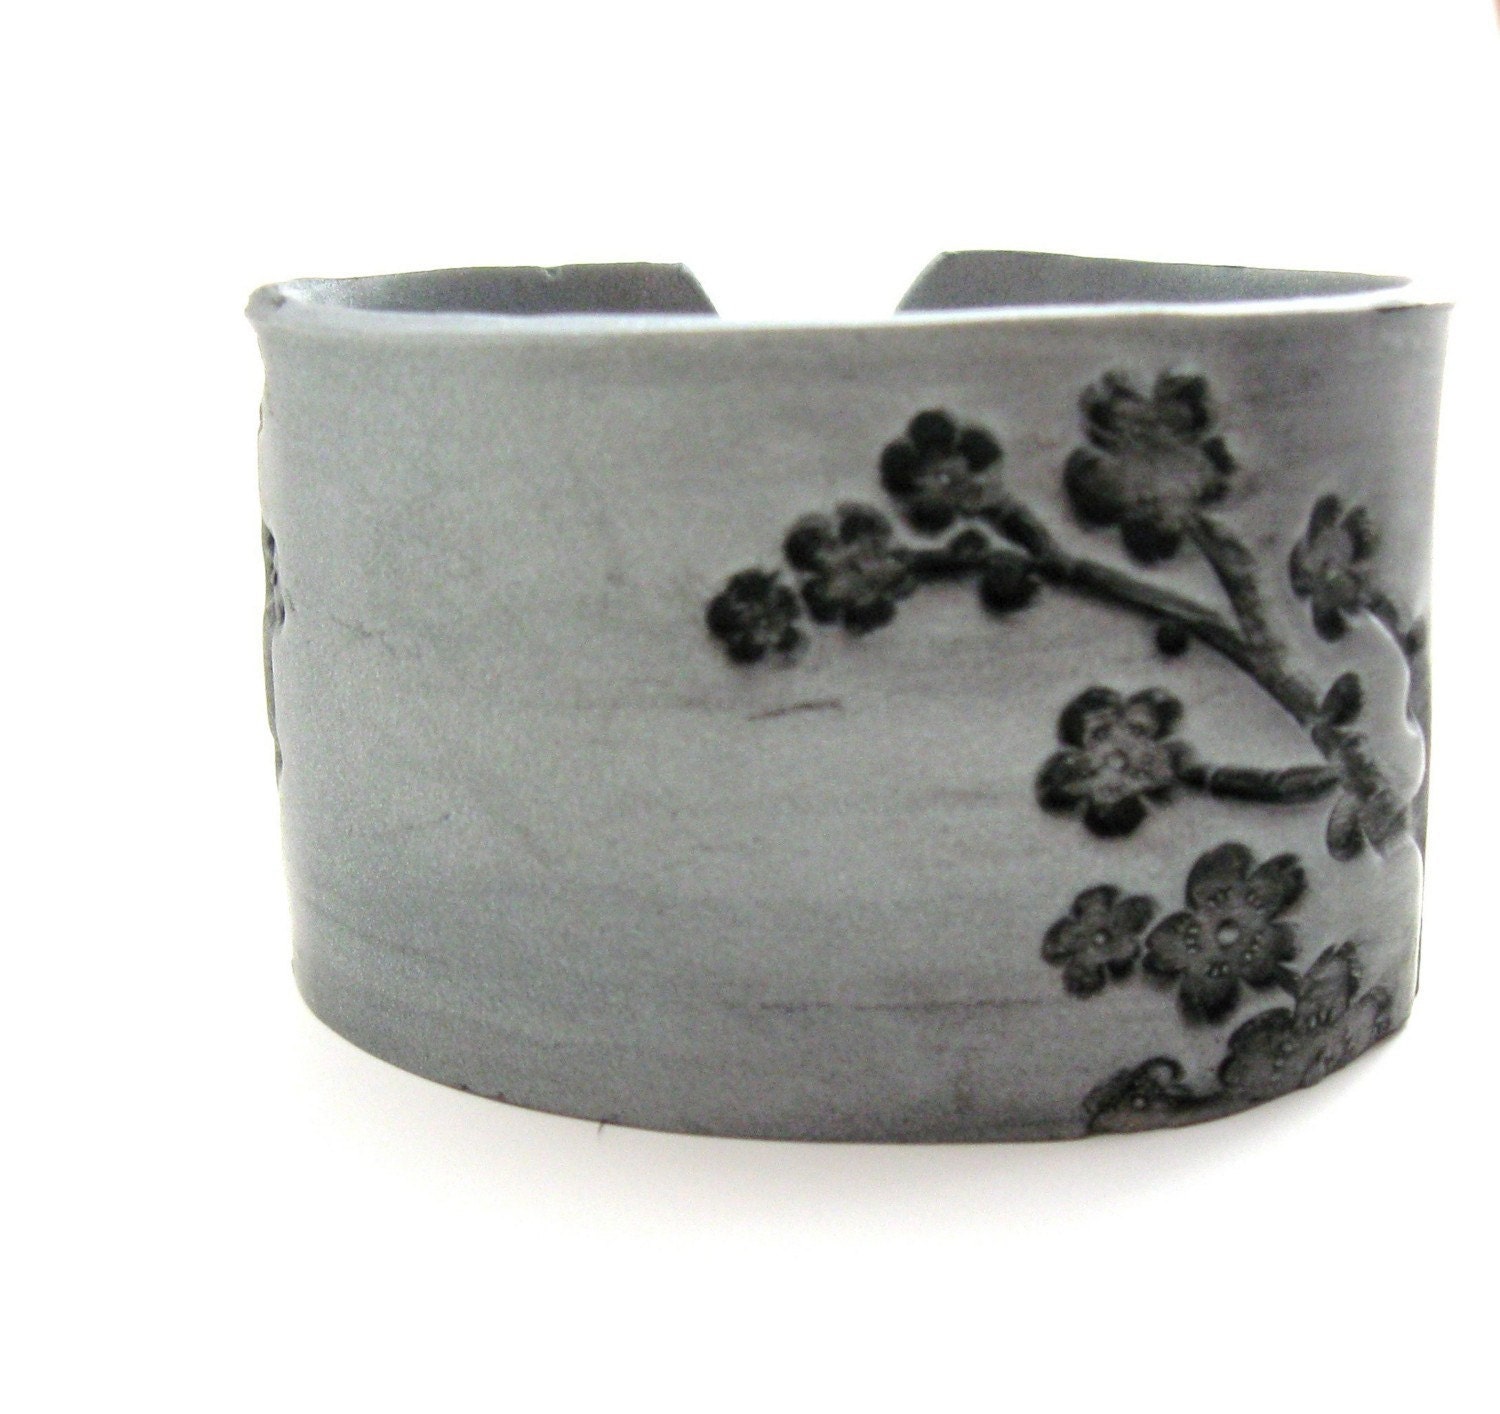 Silver cuff bracelet Asian floral blossoms design, handmade cuff bracelets by theshagbag on Etsy